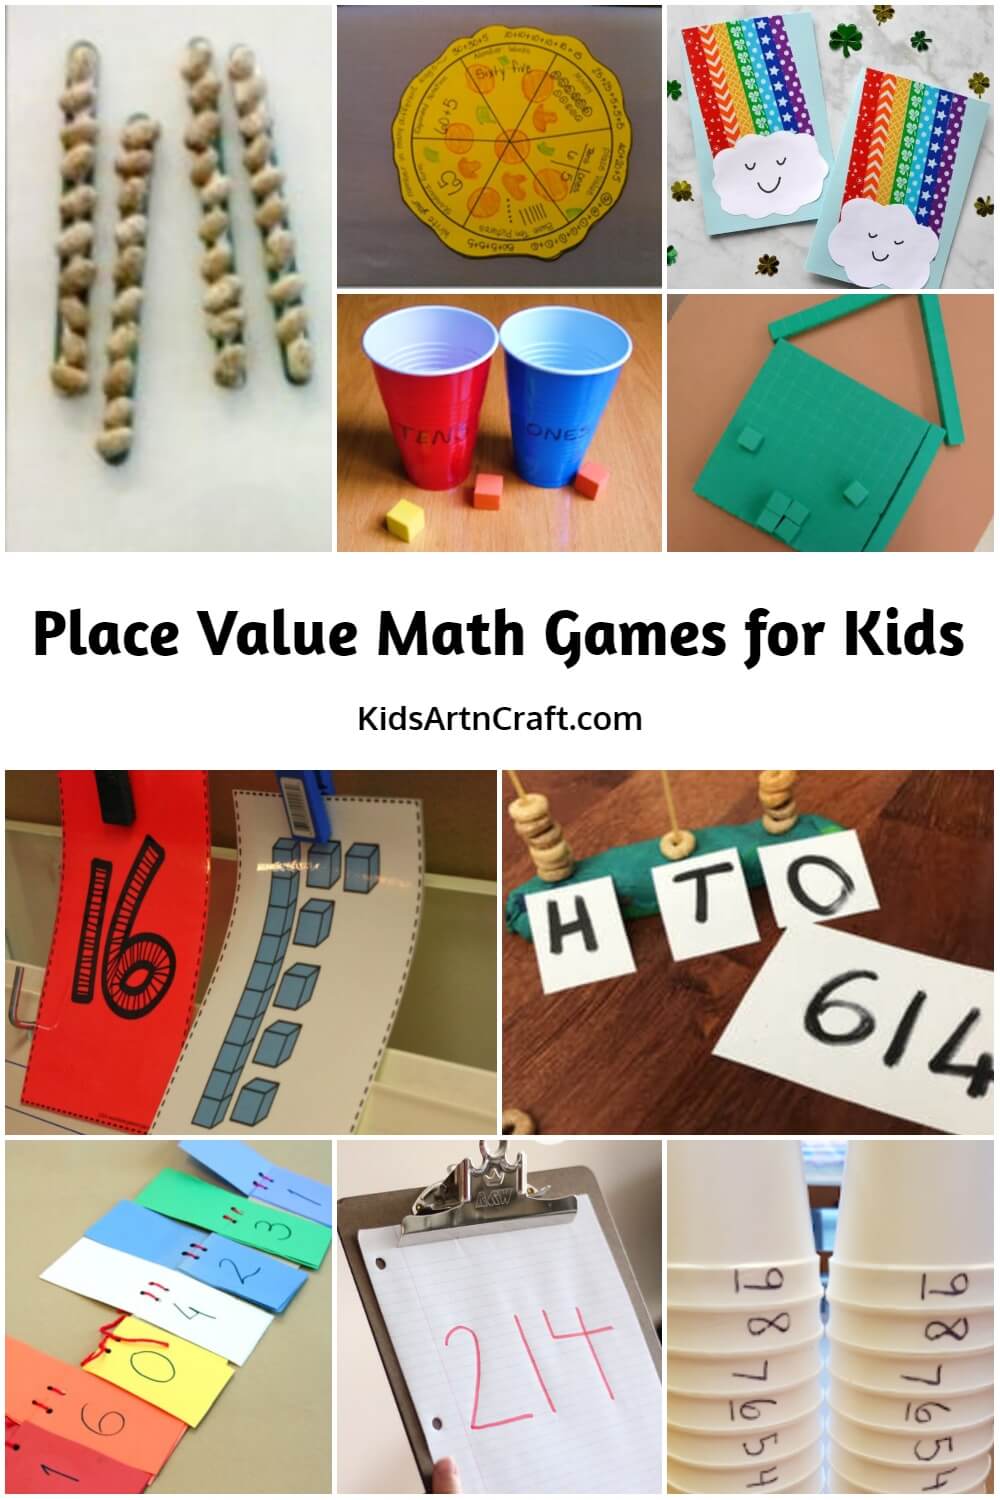  Place Value Math Games for Kids Joyful Way To Learn Math With Place Value Games